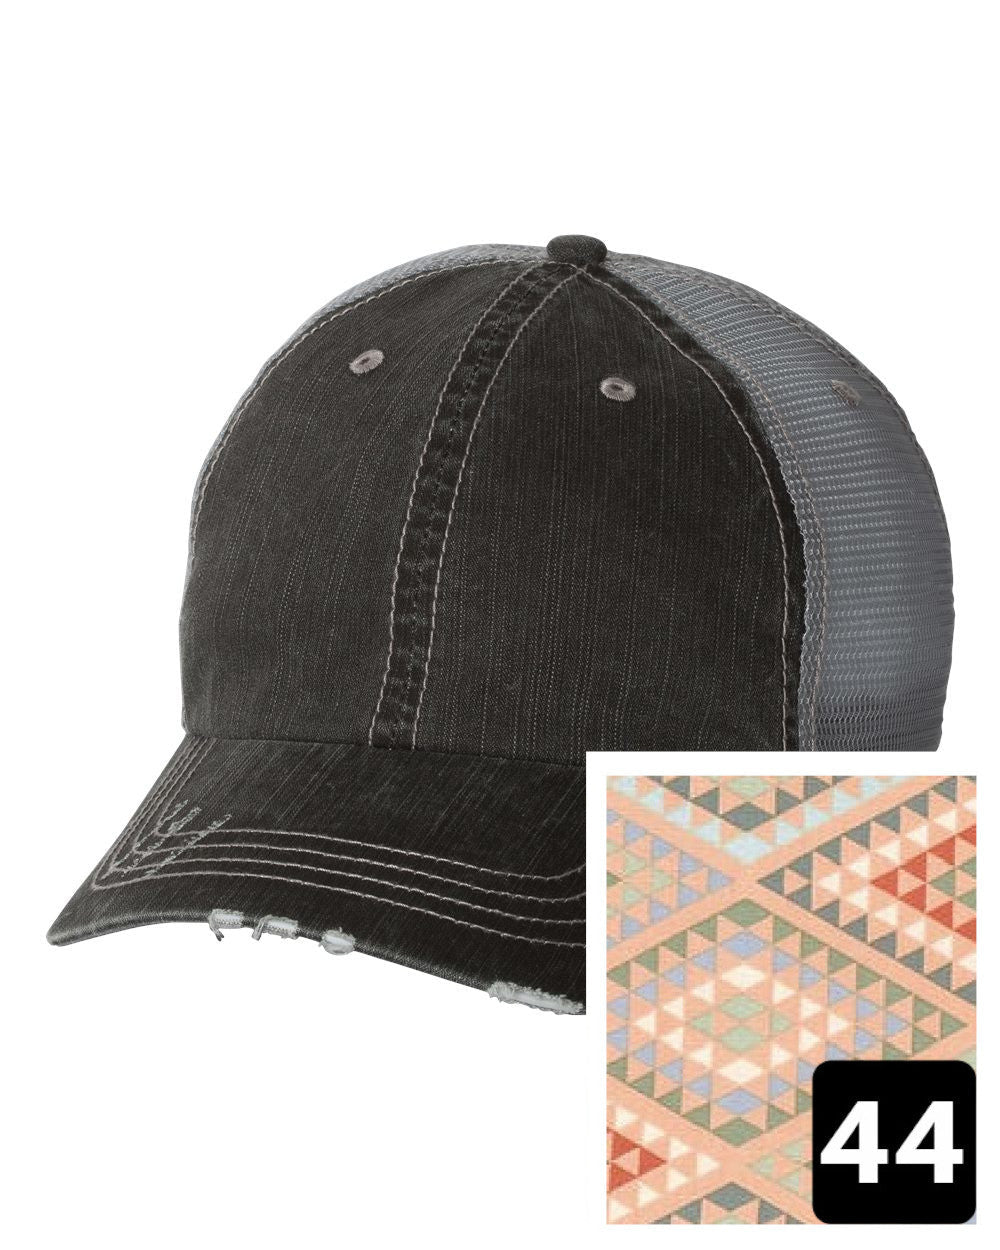 gray distressed trucker hat with navy coral and white chevron fabric state of Kansas